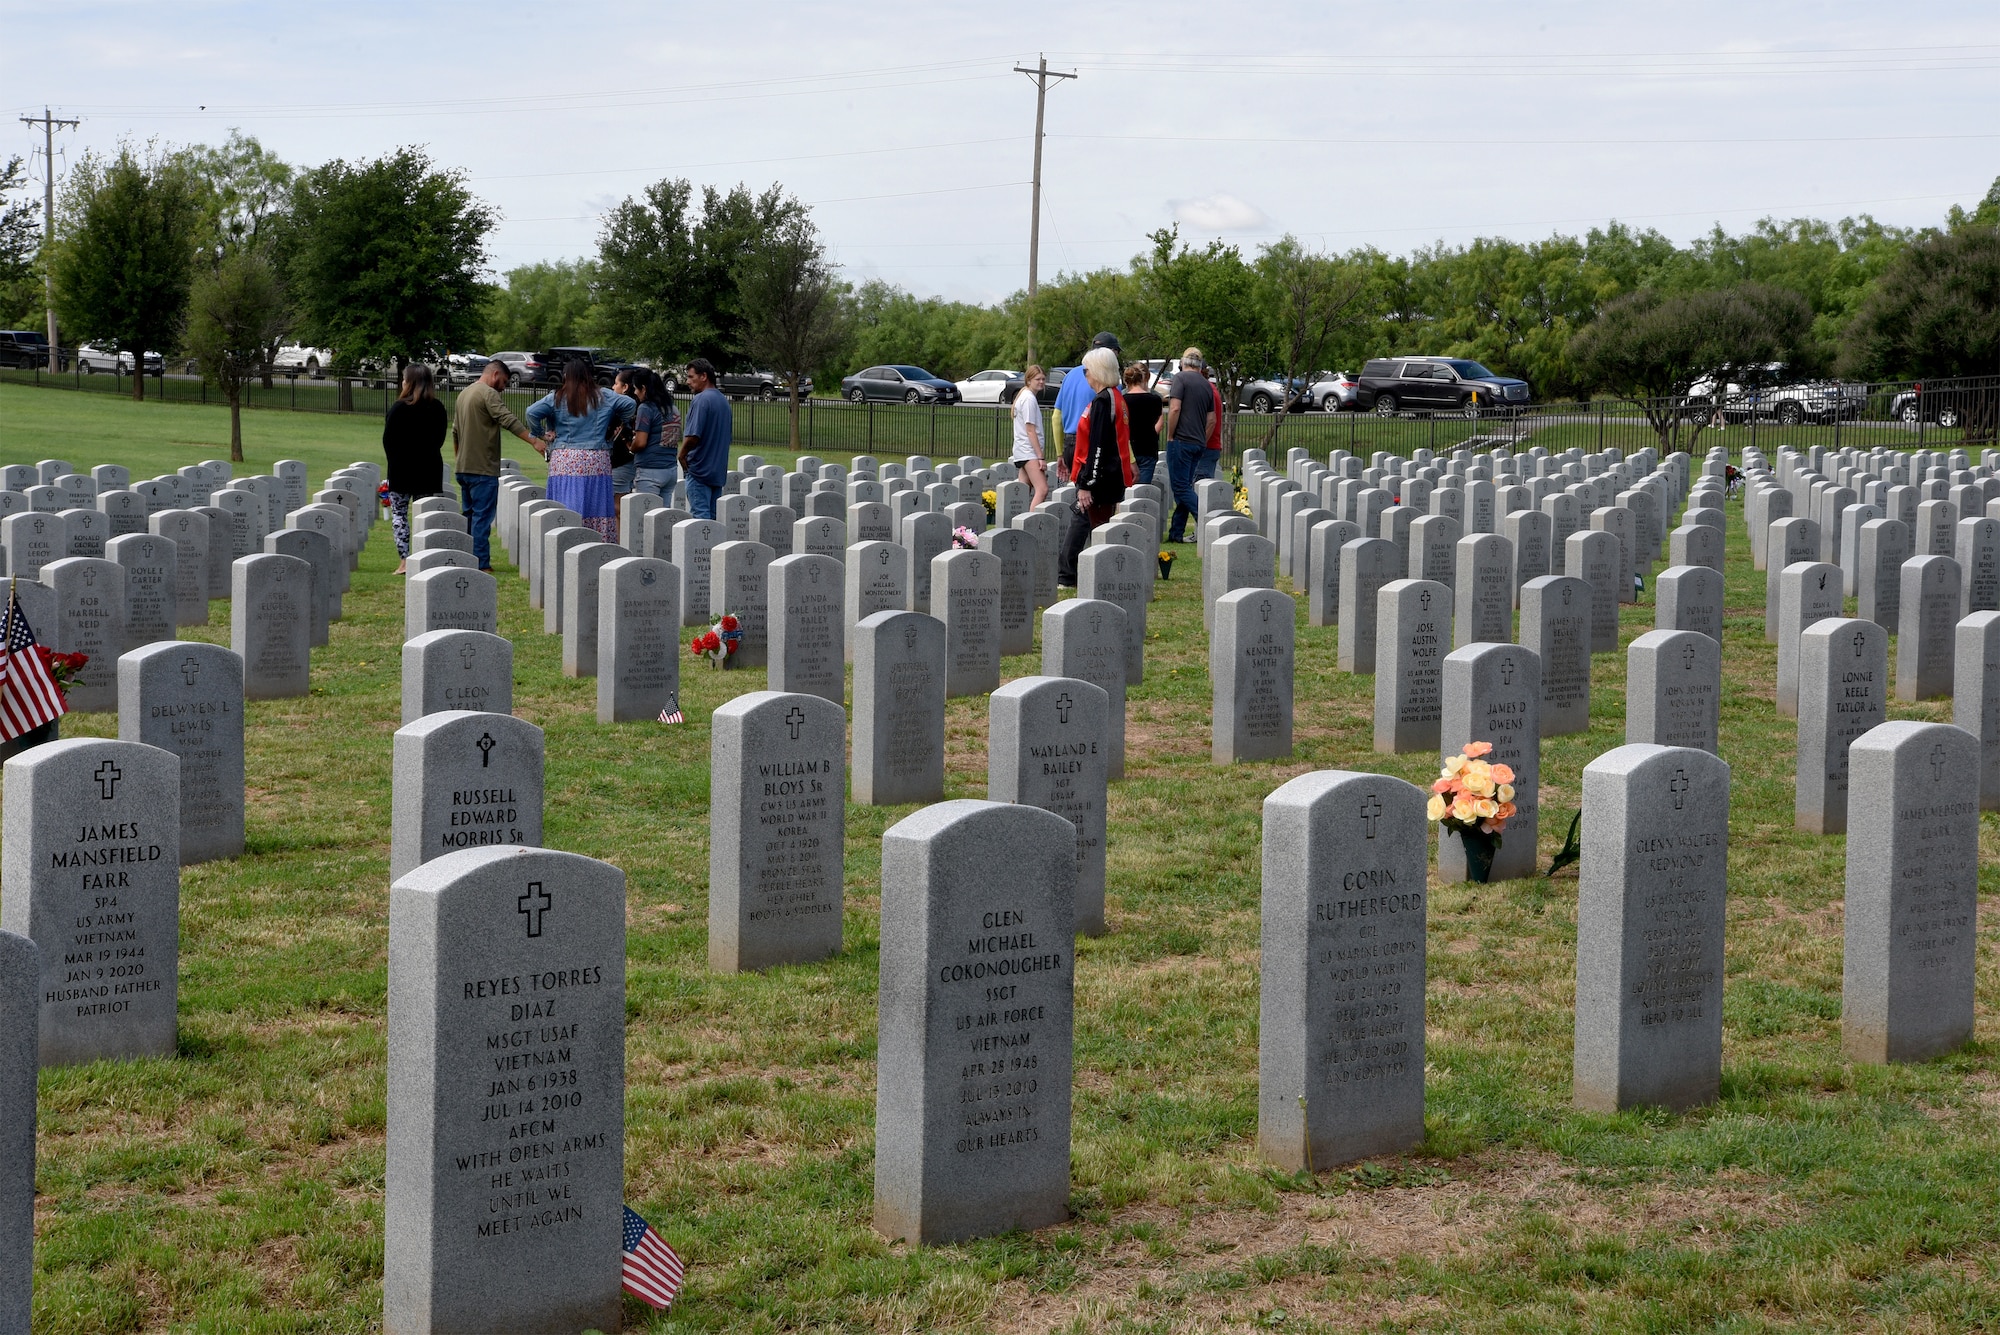 Members of the Abilene community pay their respects to the deceased after the Memorial Day service at the Texas State Veterans Cemetery in Abilene, Texas, May 29, 2023. Memorial Day is a time to honor the ultimate sacrifice of the service members that gave their lives in defense of the United States. (U.S. Air Force photo by Senior Airman Sophia Robello)